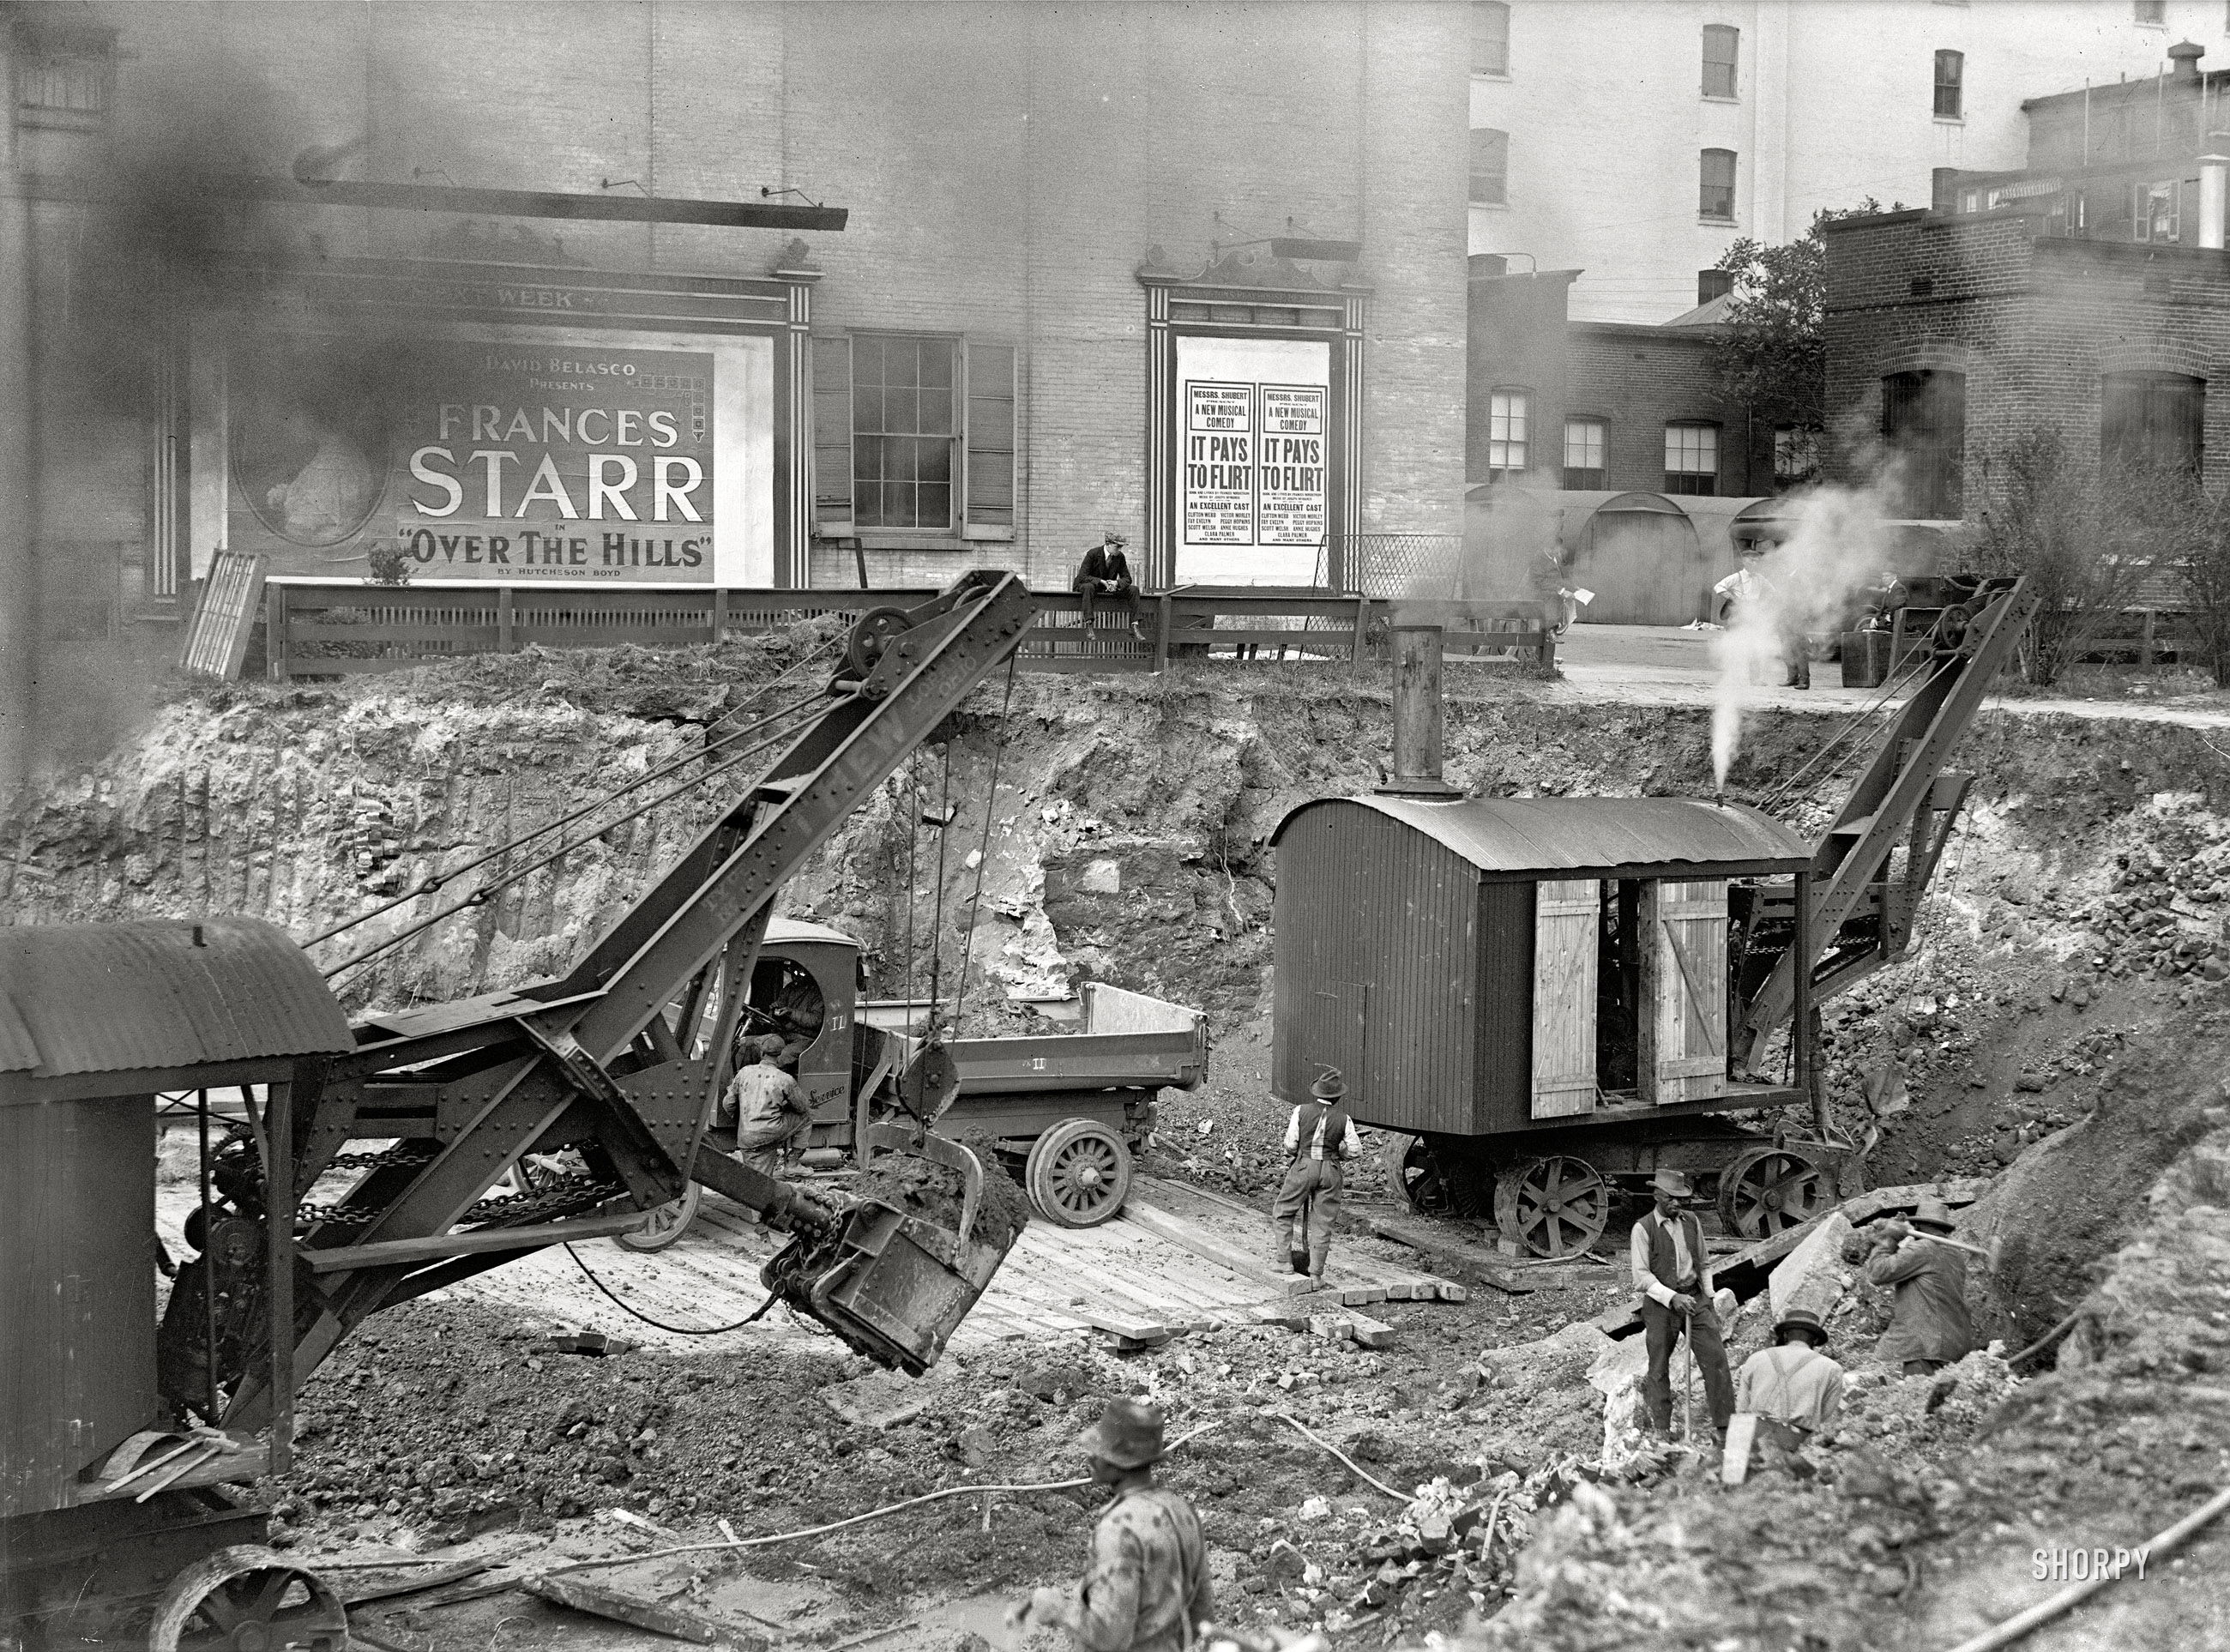 Washington, D.C., April 1918. "Downtown construction." Excavation with a theatrical backdrop. Harris & Ewing Collection glass negative. View full size.